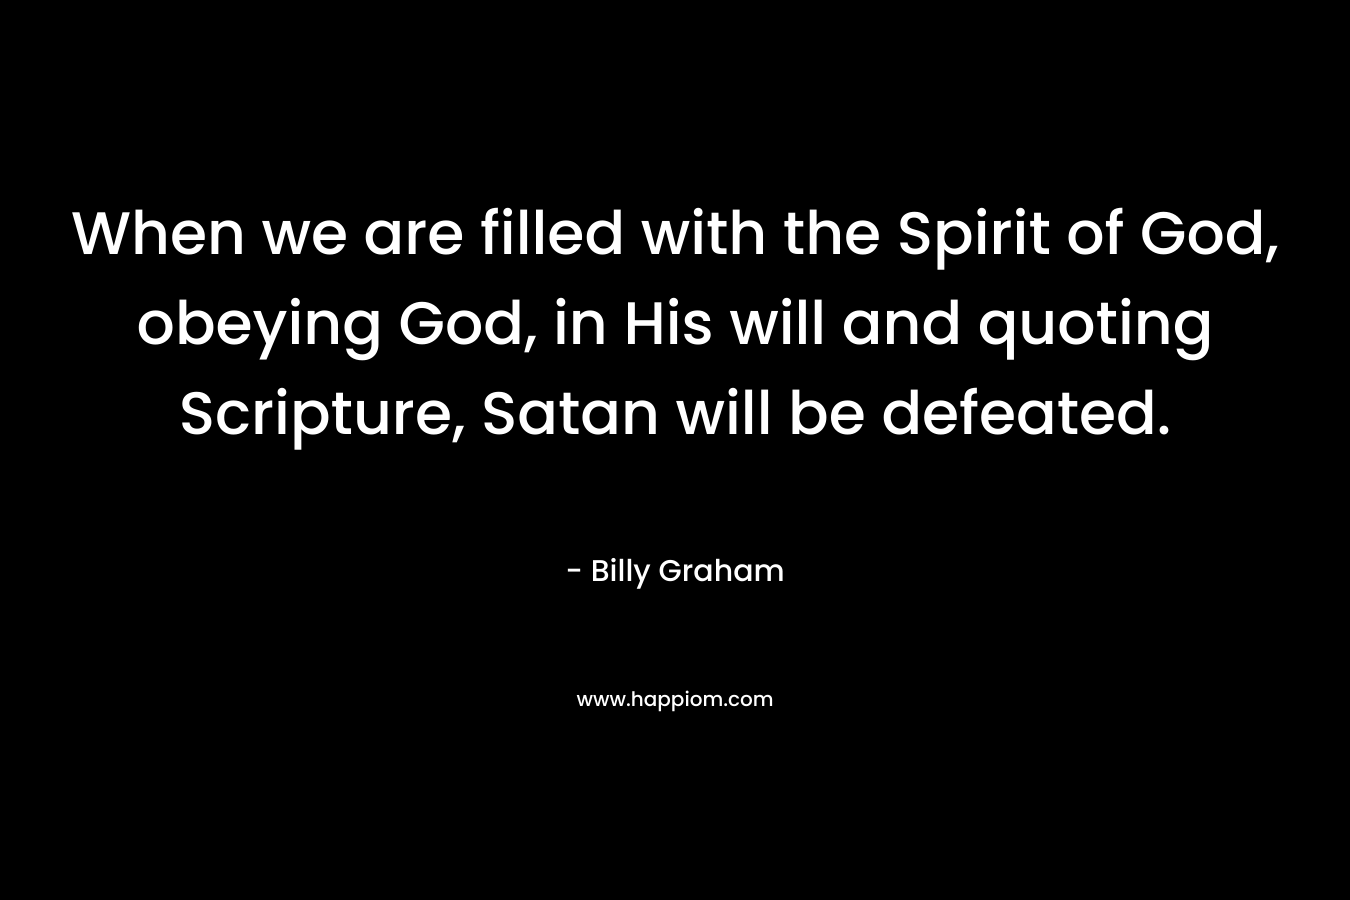 When we are filled with the Spirit of God, obeying God, in His will and quoting Scripture, Satan will be defeated.